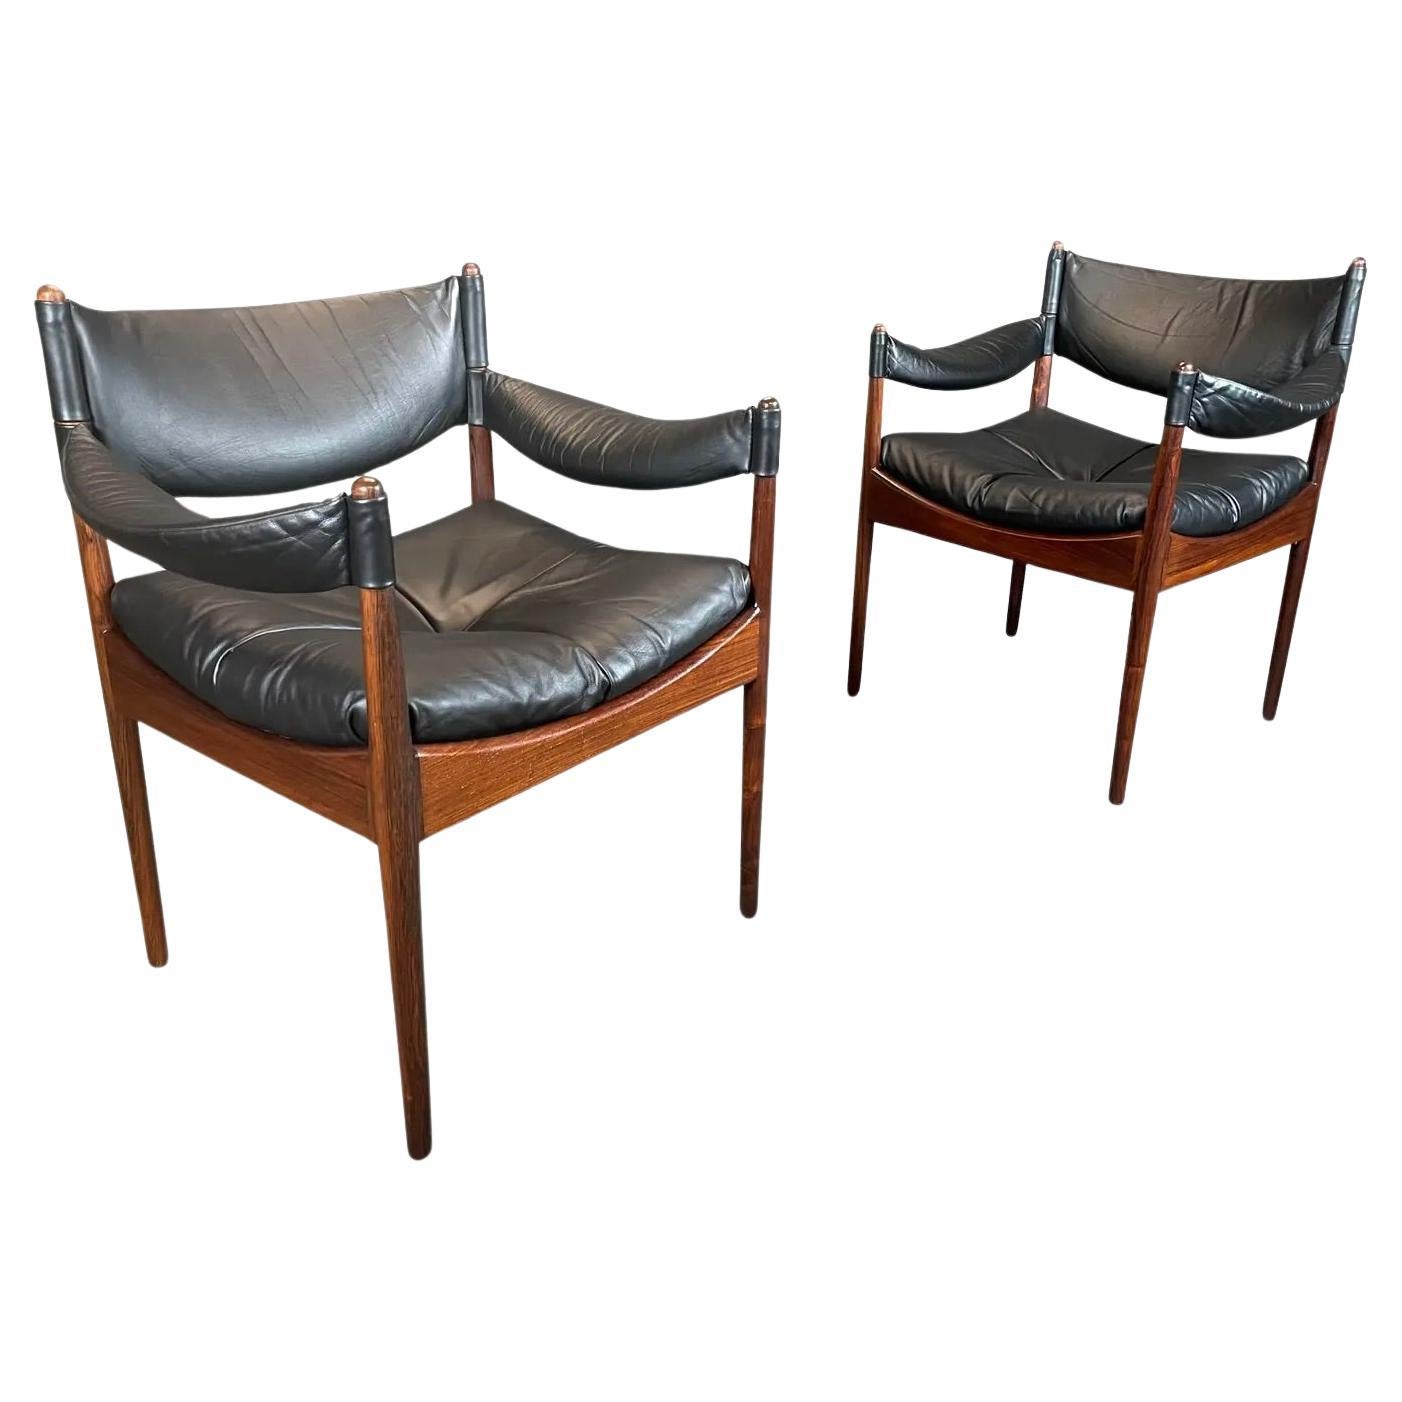 Pair of Vintage Mid Century Modern Rosewood "Modus" Chairs by Kristian Vedel